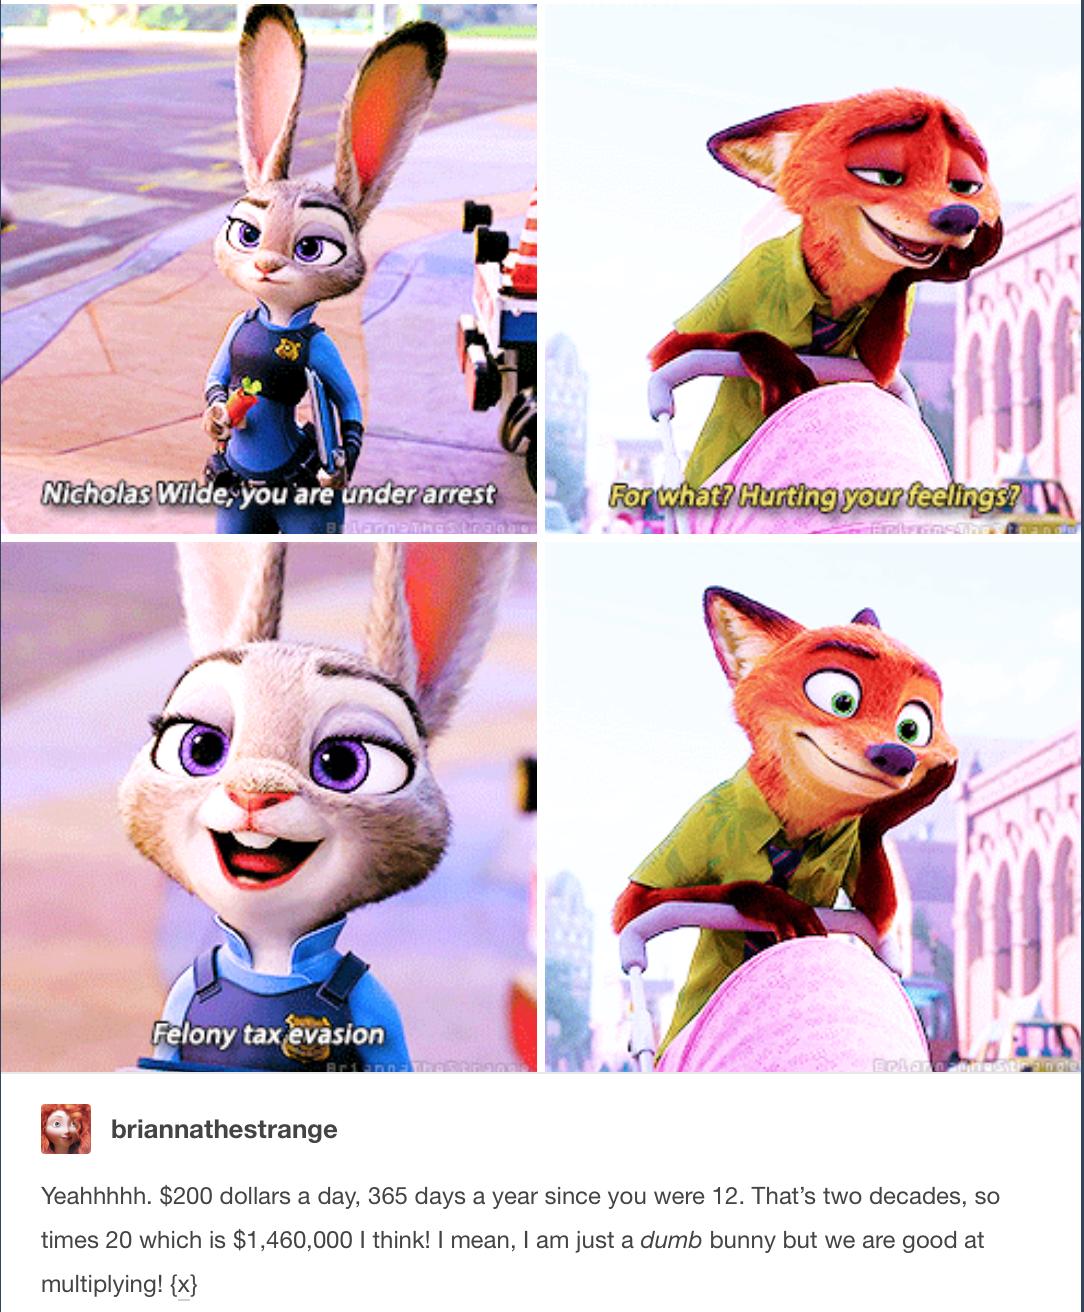 A scene from Zootopia where Judy arrests Nick for tax evasion